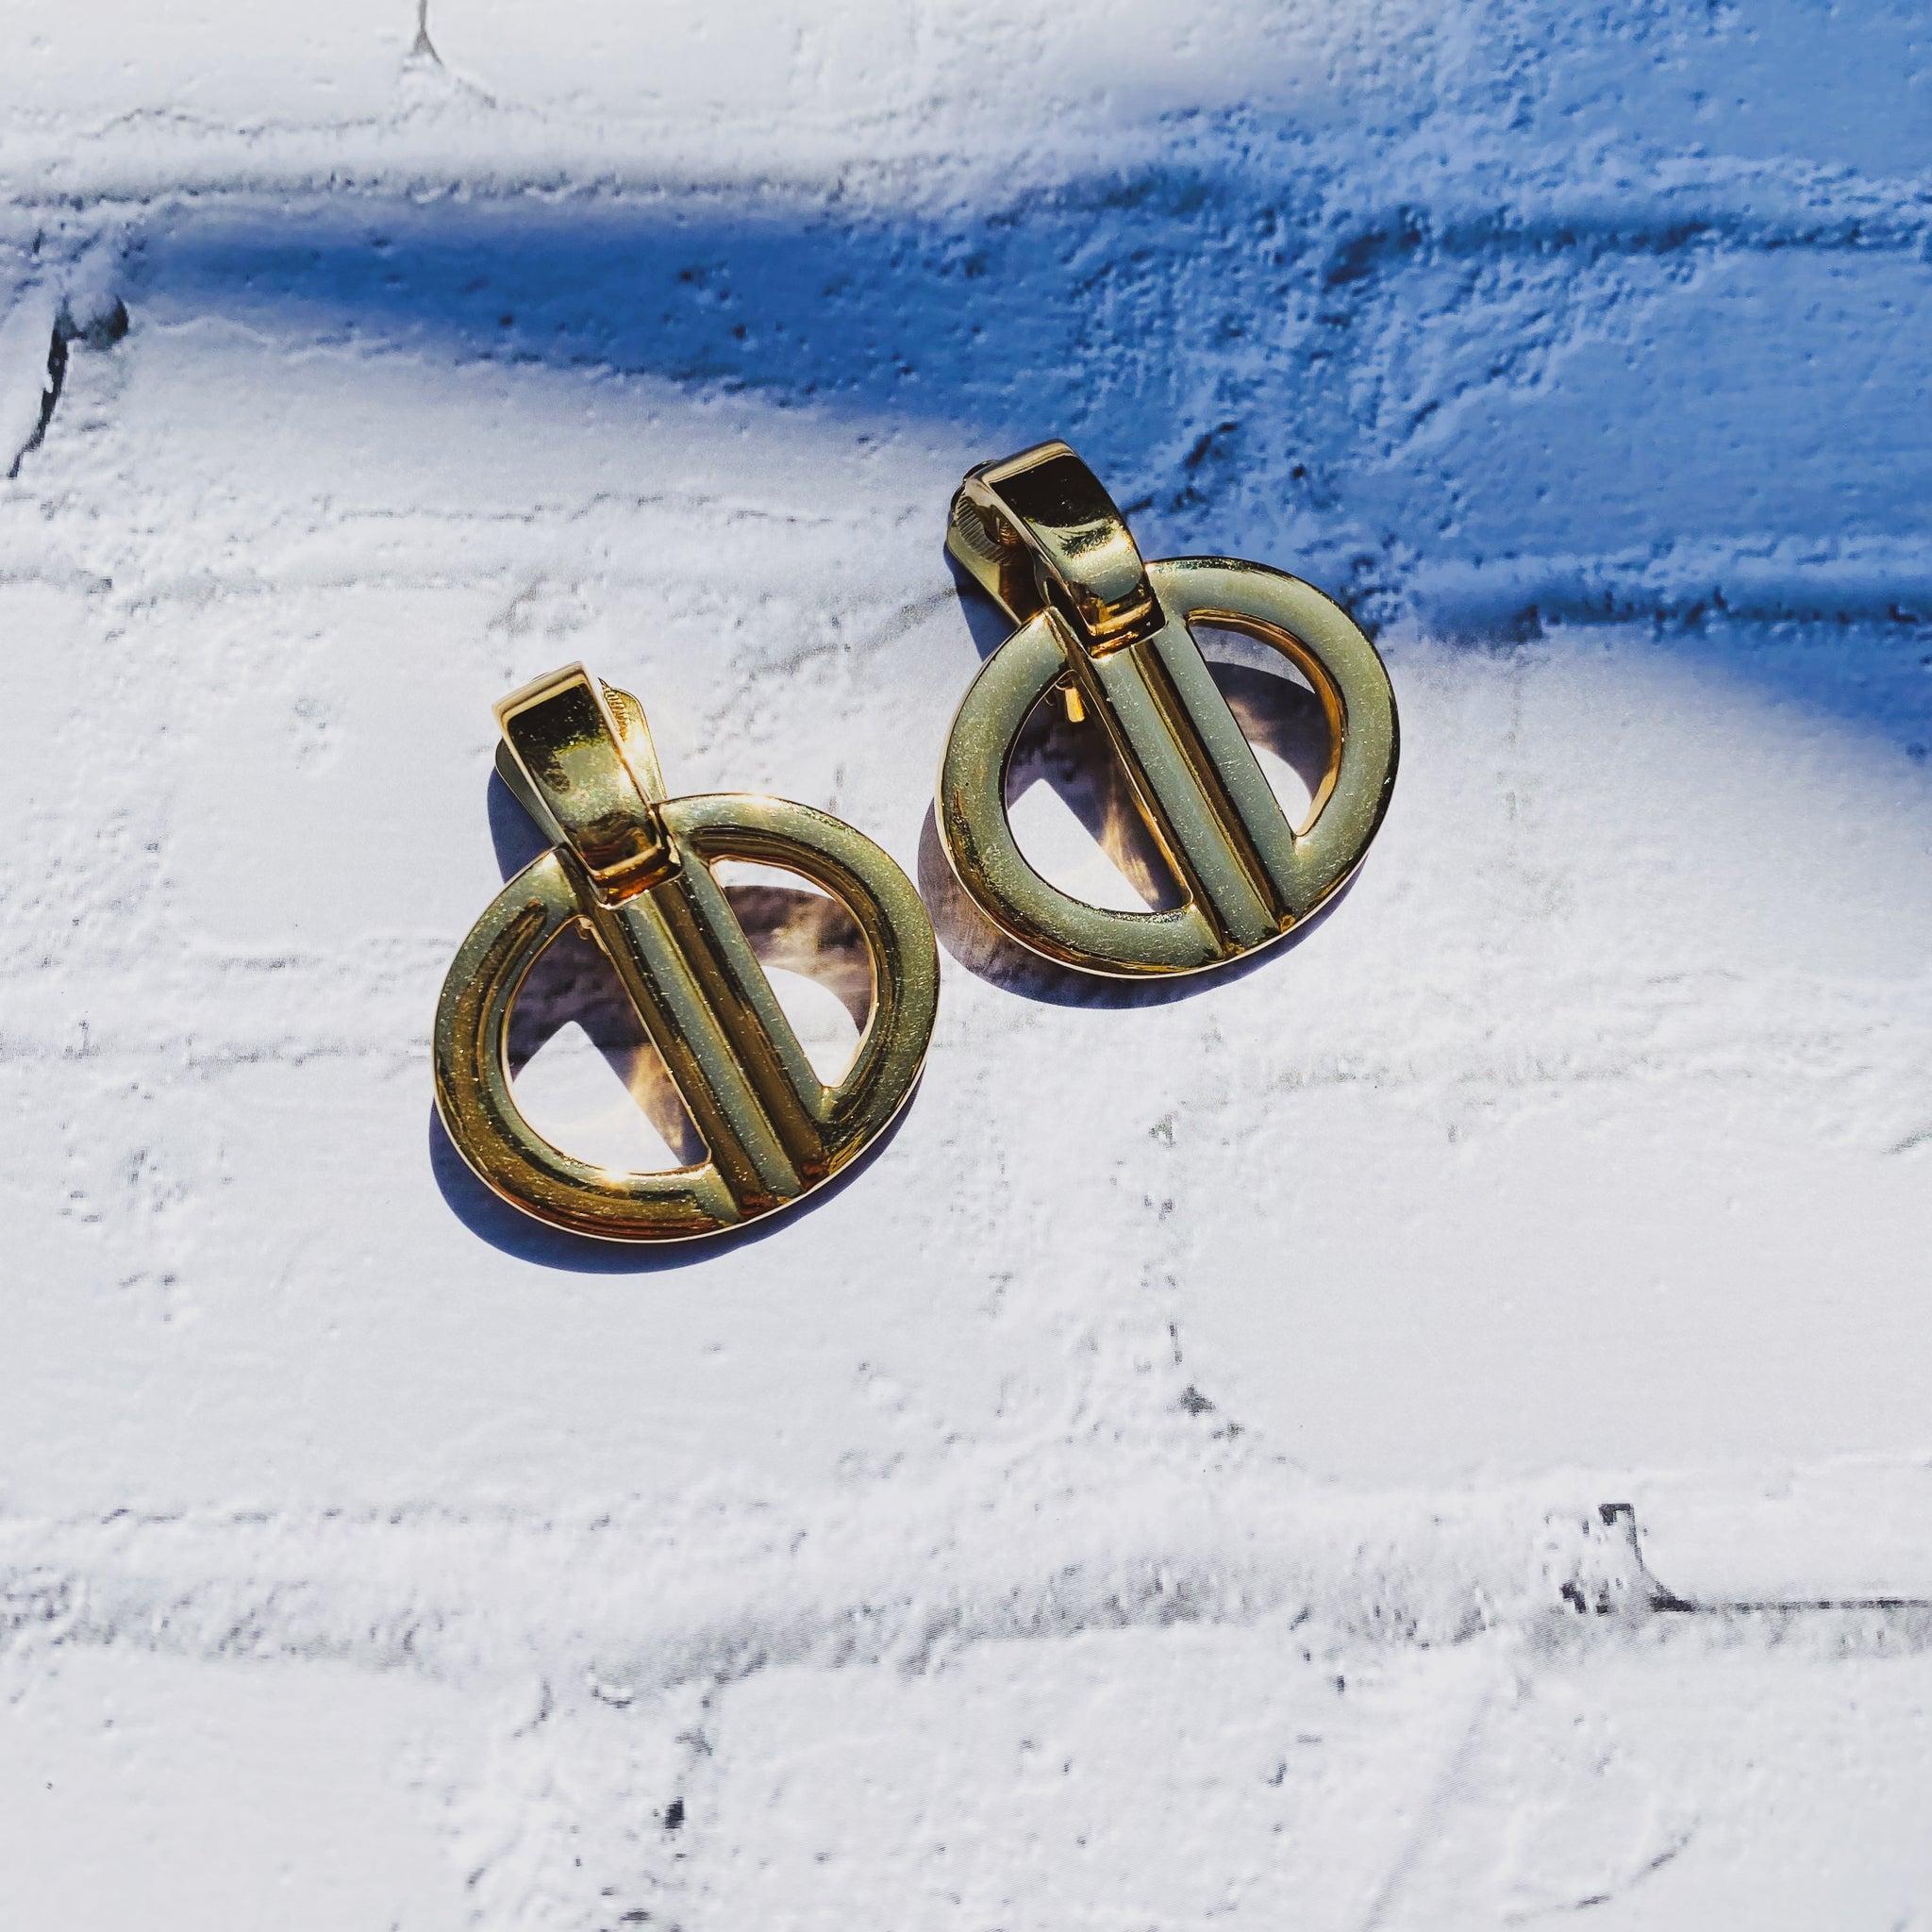 Get ready to fall in love with these divine Christian Dior clip-on earrings from the glorious 1980s. Step  back into a time when bold jewellery was the ultimate symbol of sophistication.

These earrings aren't just accessories; they're little pieces